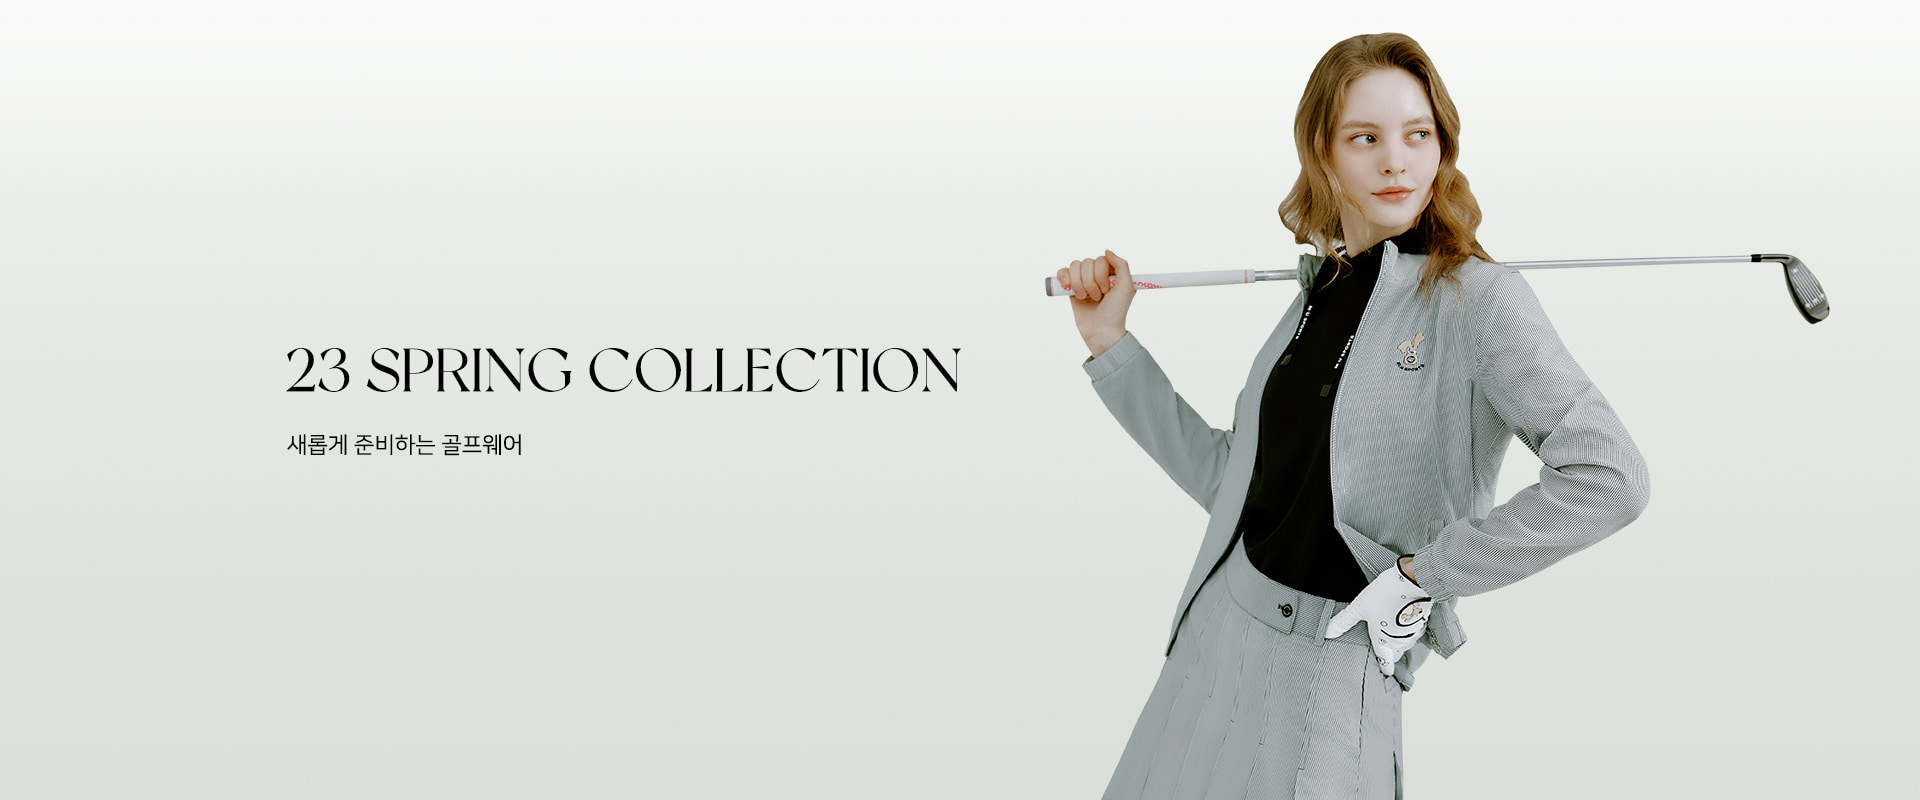 23 SPRING COLLECTION